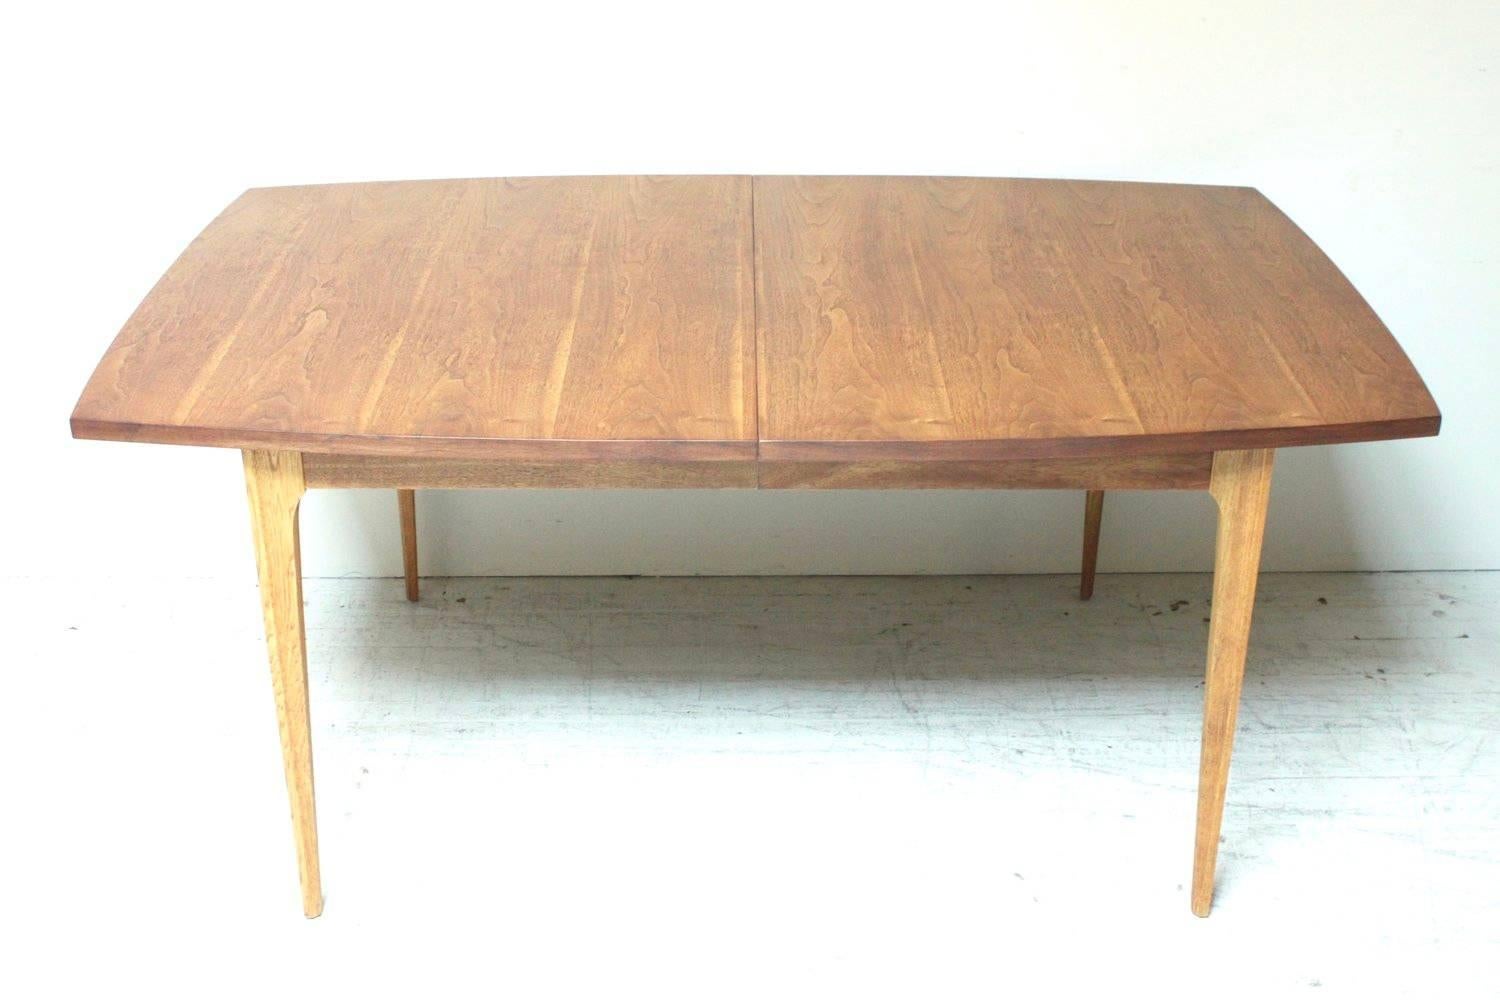 Nice walnut 1960s American dining table with one 12